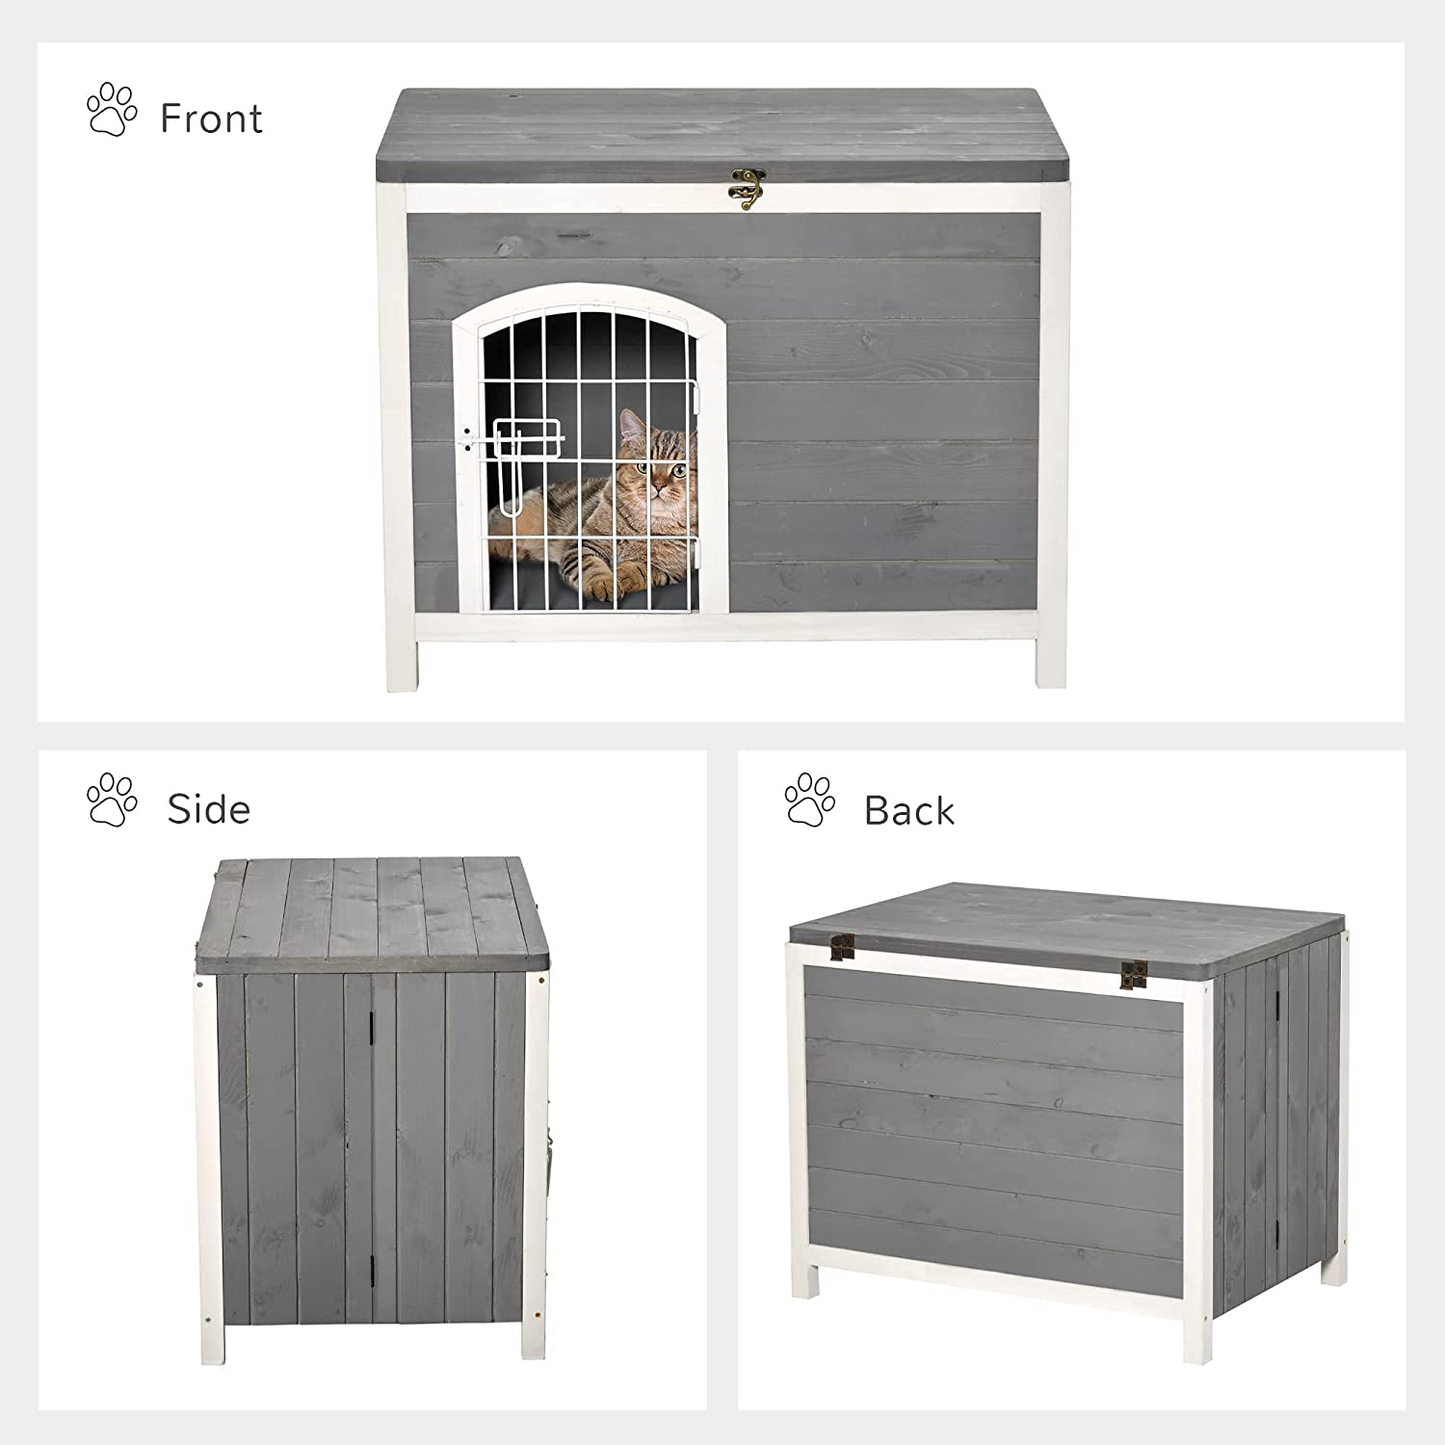 Pawhut Foldable Raised Wooden Dog House Indoor & Outdoor Dog Cage Kennel Cat House W/Lockable Door Openable Roof Removable Bottom for Small and Medium Pets Grey